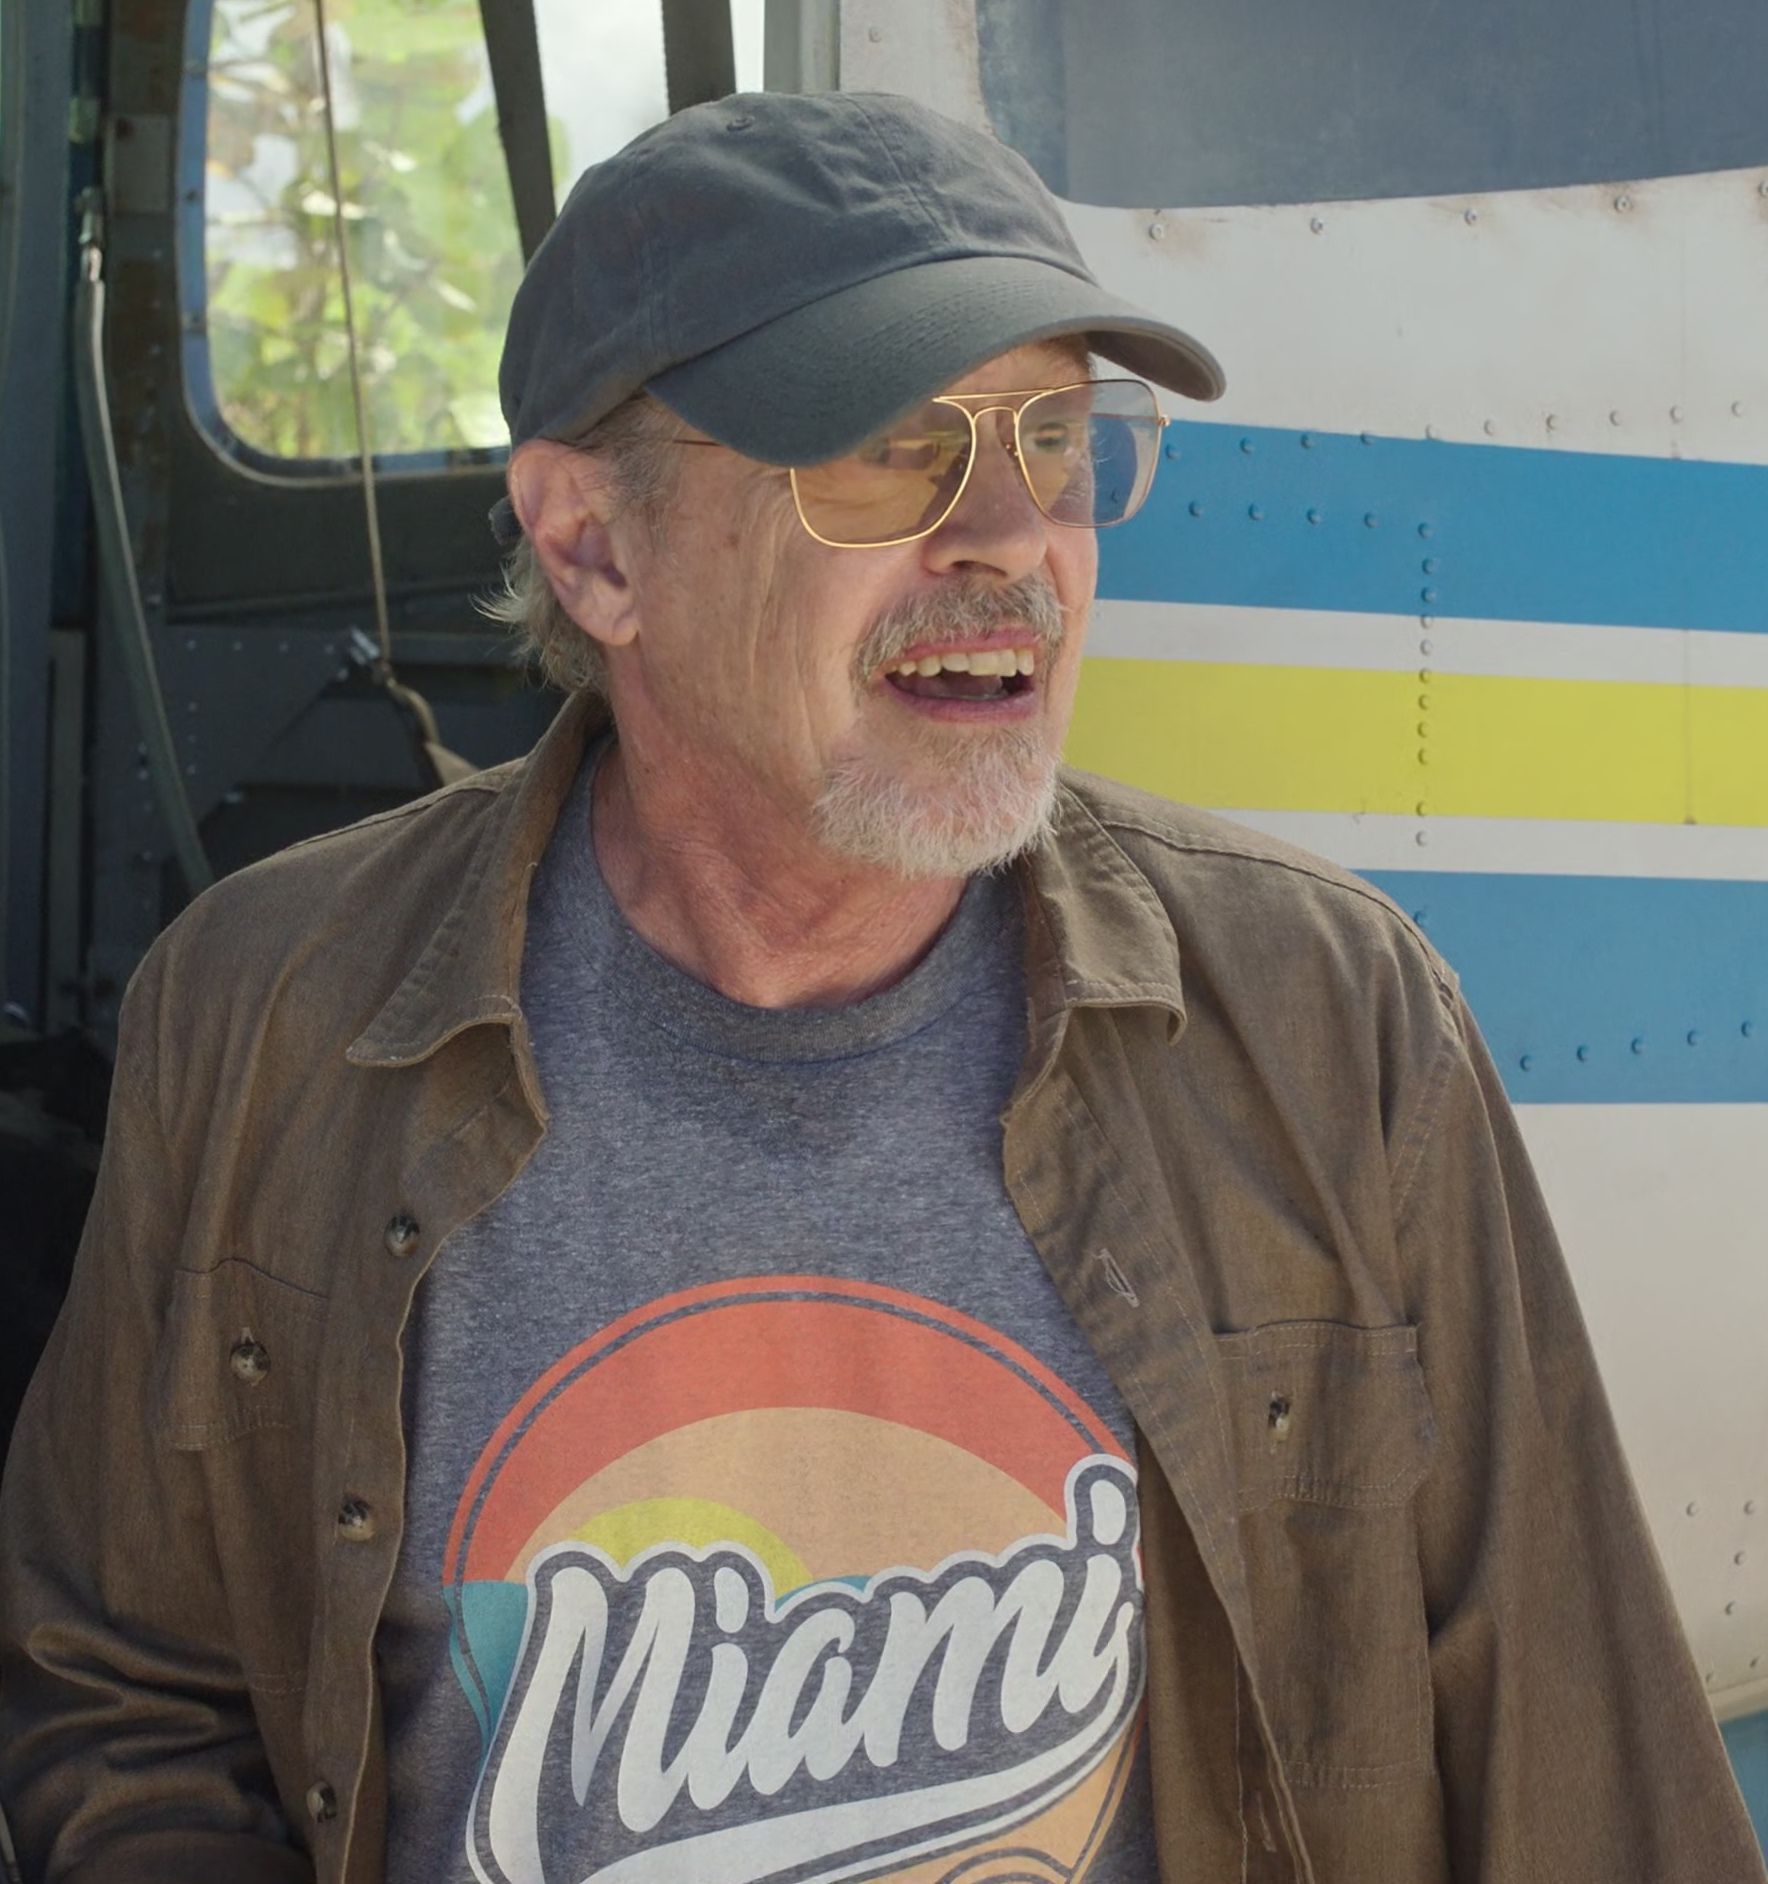 Worn on Vacation Friends 2 (2023) Movie - 'Miami' Print T-Shirt of Steve Buscemi as Reese Hackford